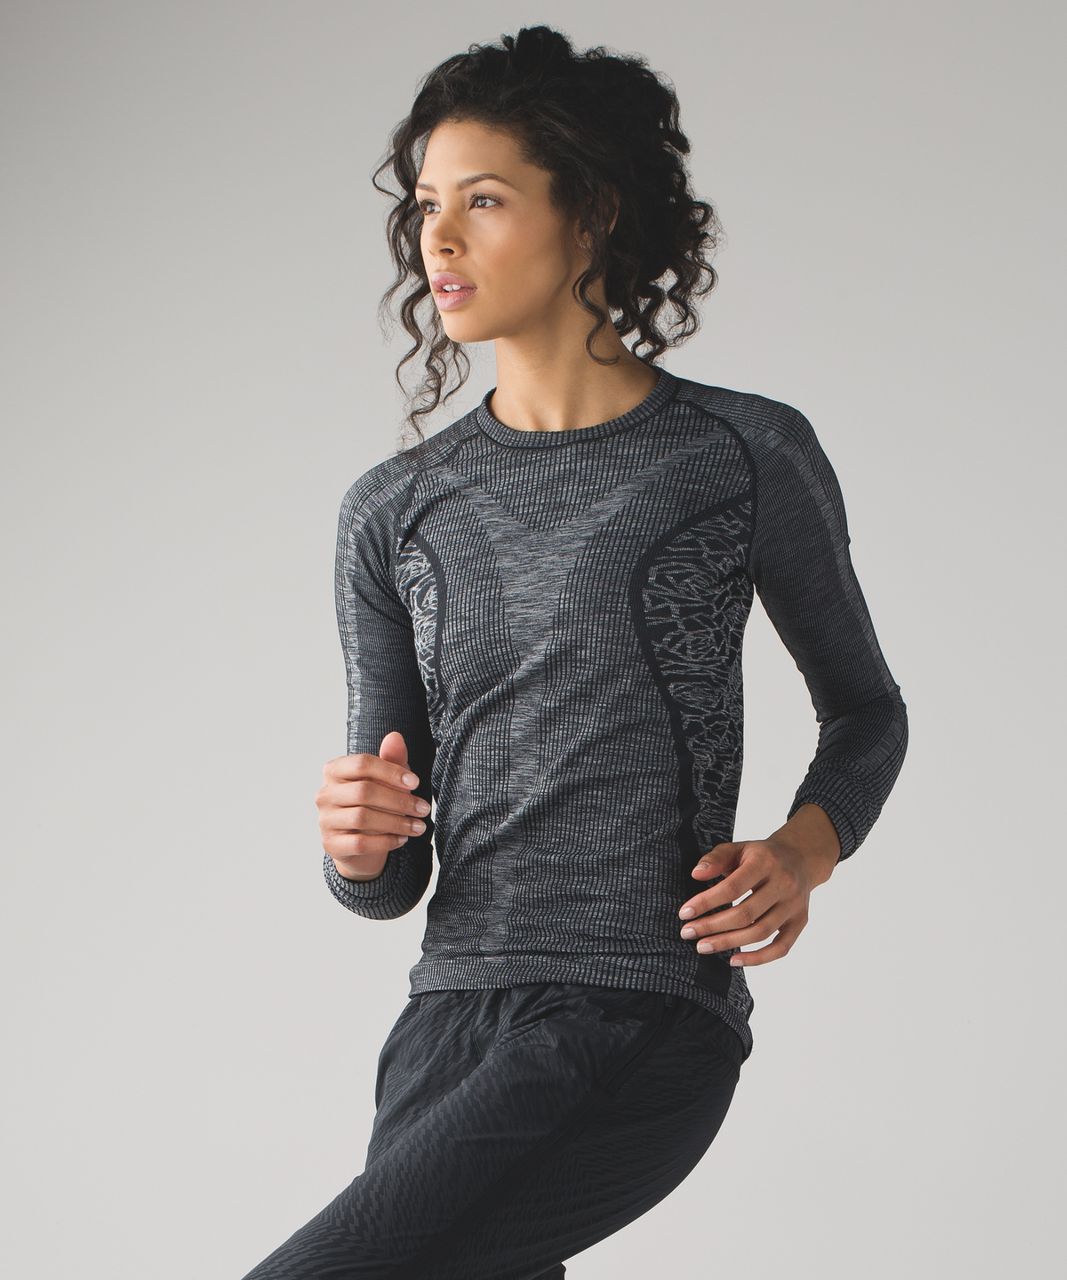 Lululemon Rest Less Pullover - Heathered Black (First Release)